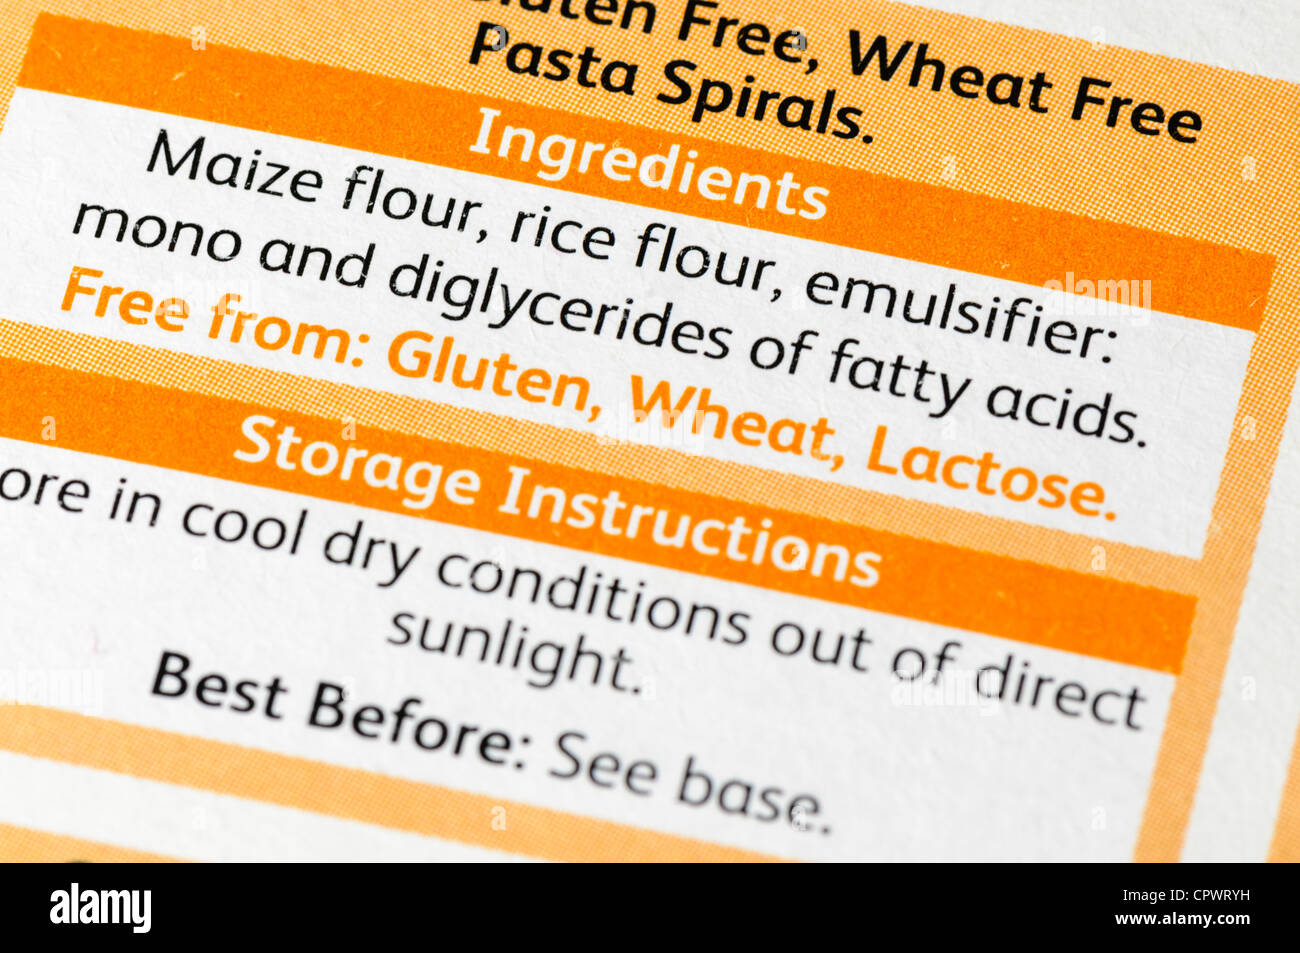 Ingredients of gluten, lactose and wheat free pasta spirals Stock Photo